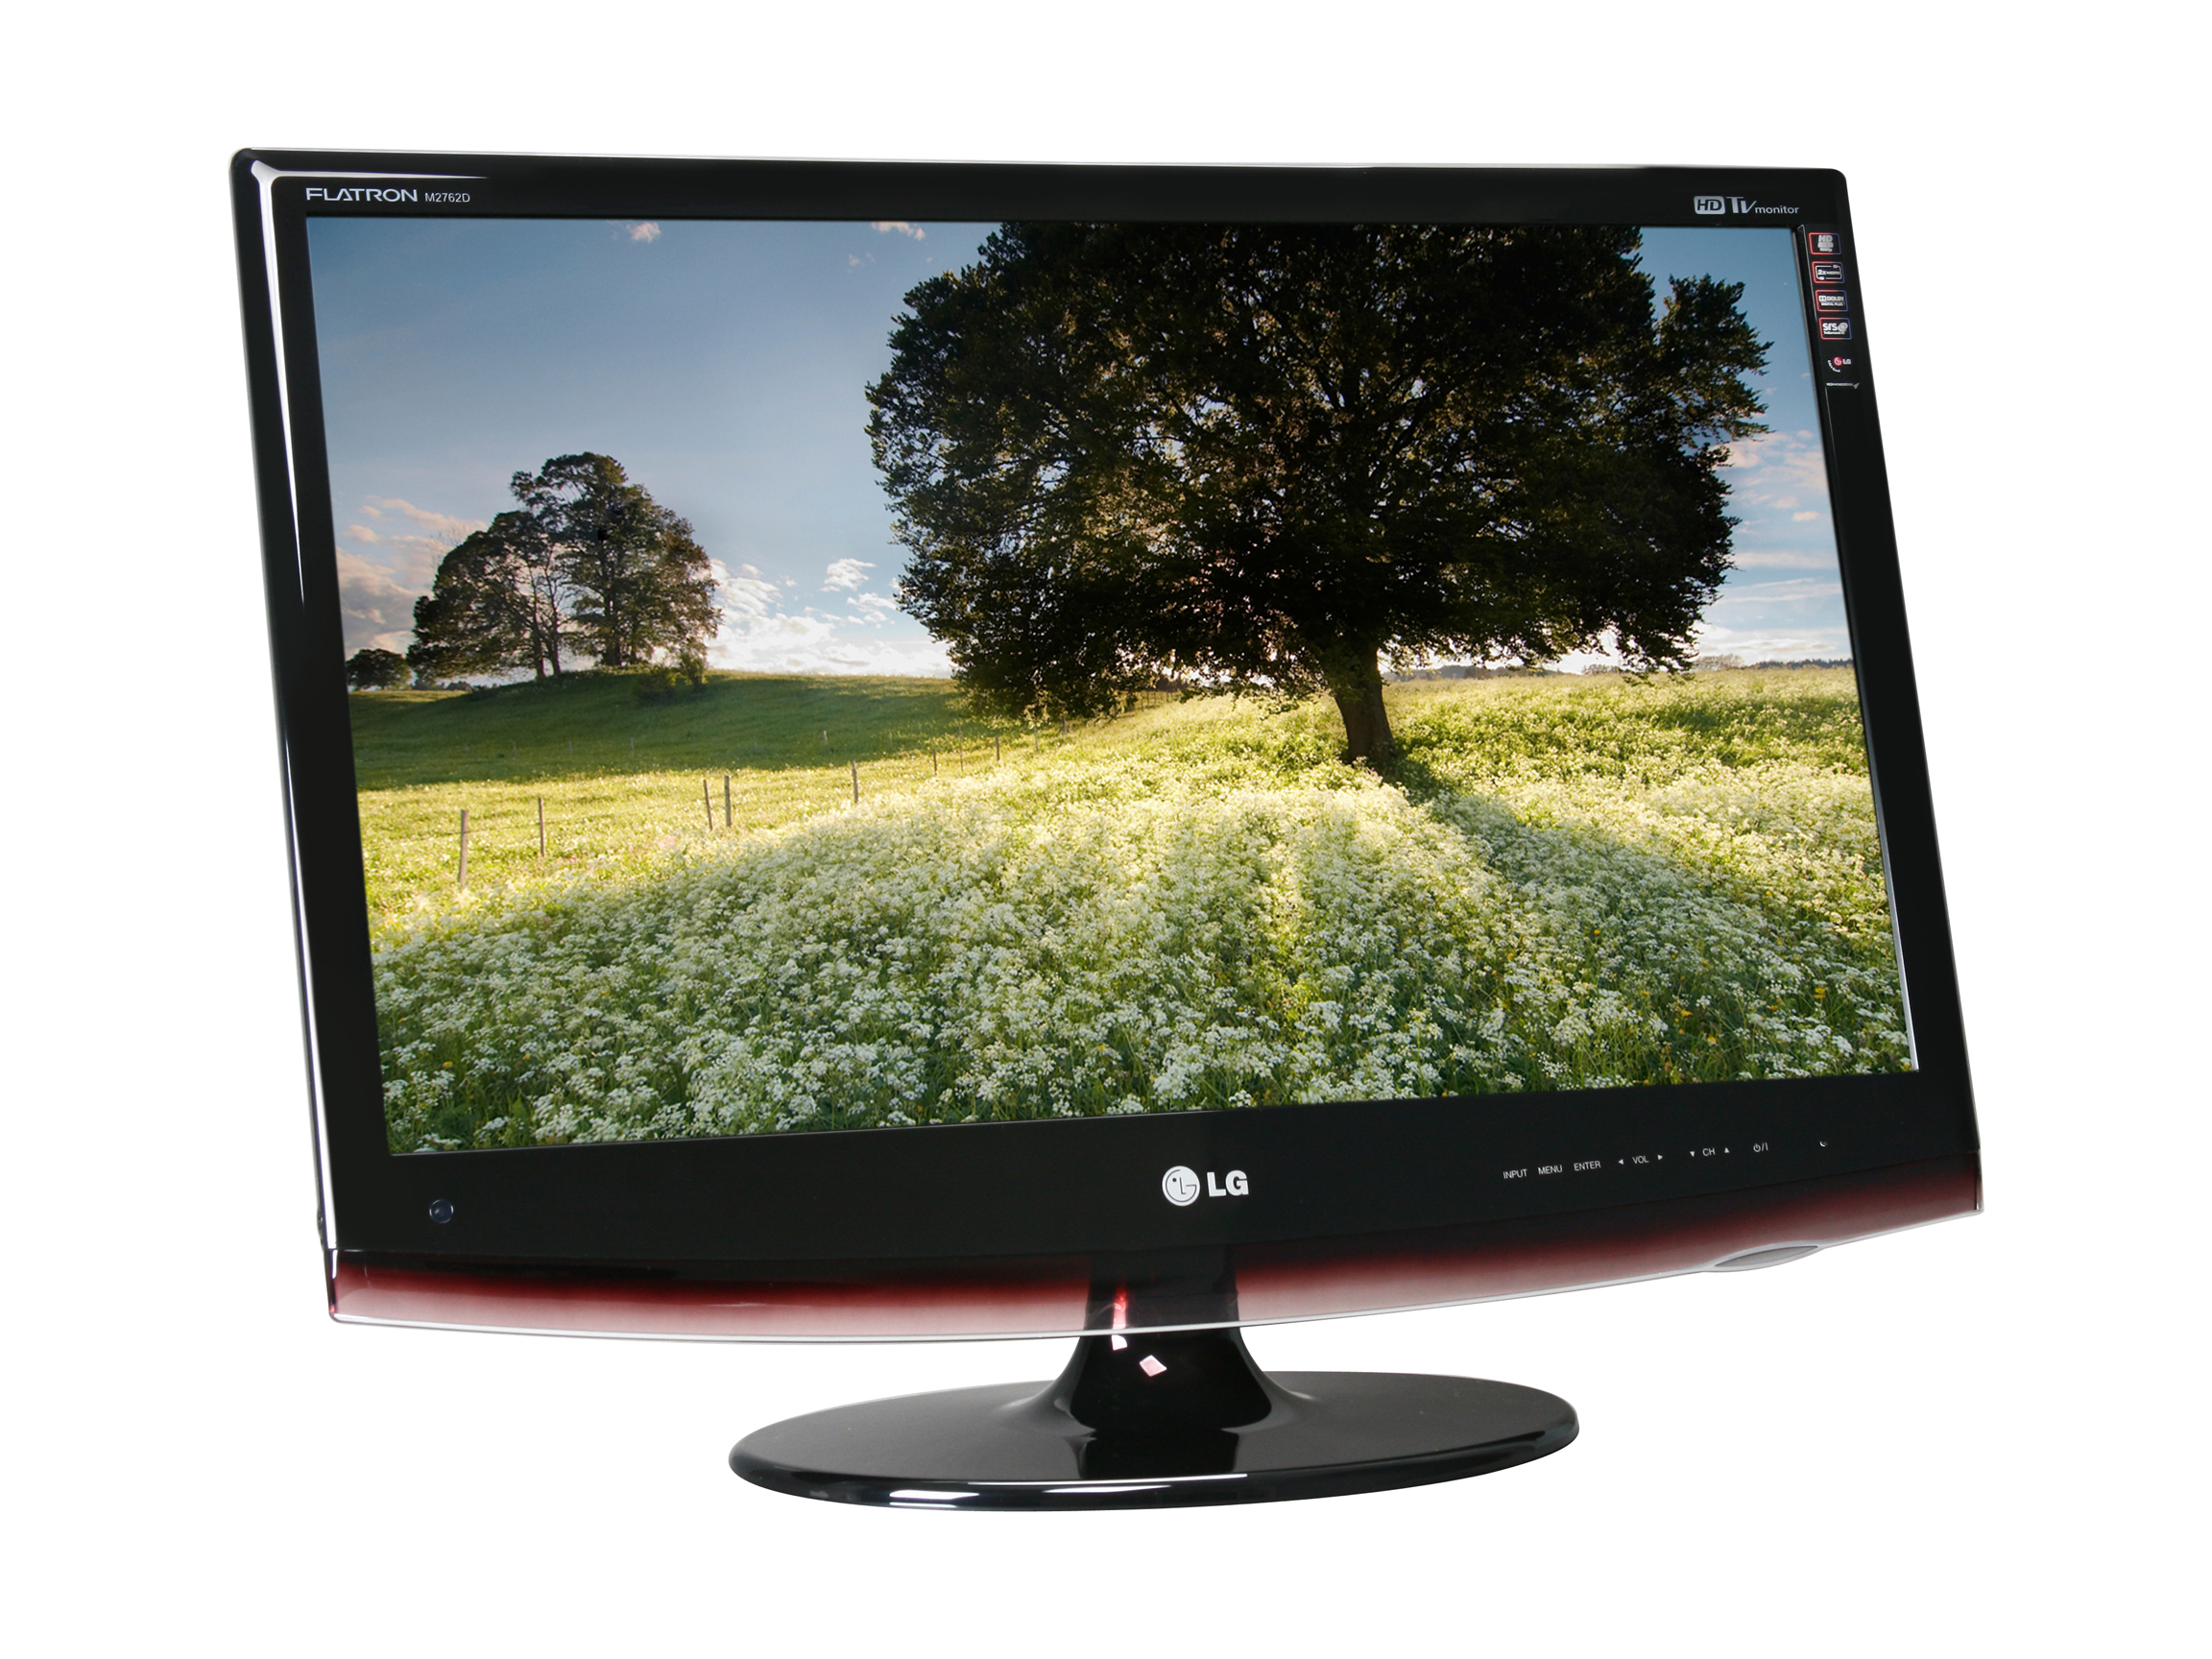 LG M2762D PM Glossy Black 27" 5ms HDMI Widescreen LCD Monitor with TV Tuner 300 cd/m2 DC 50000:1